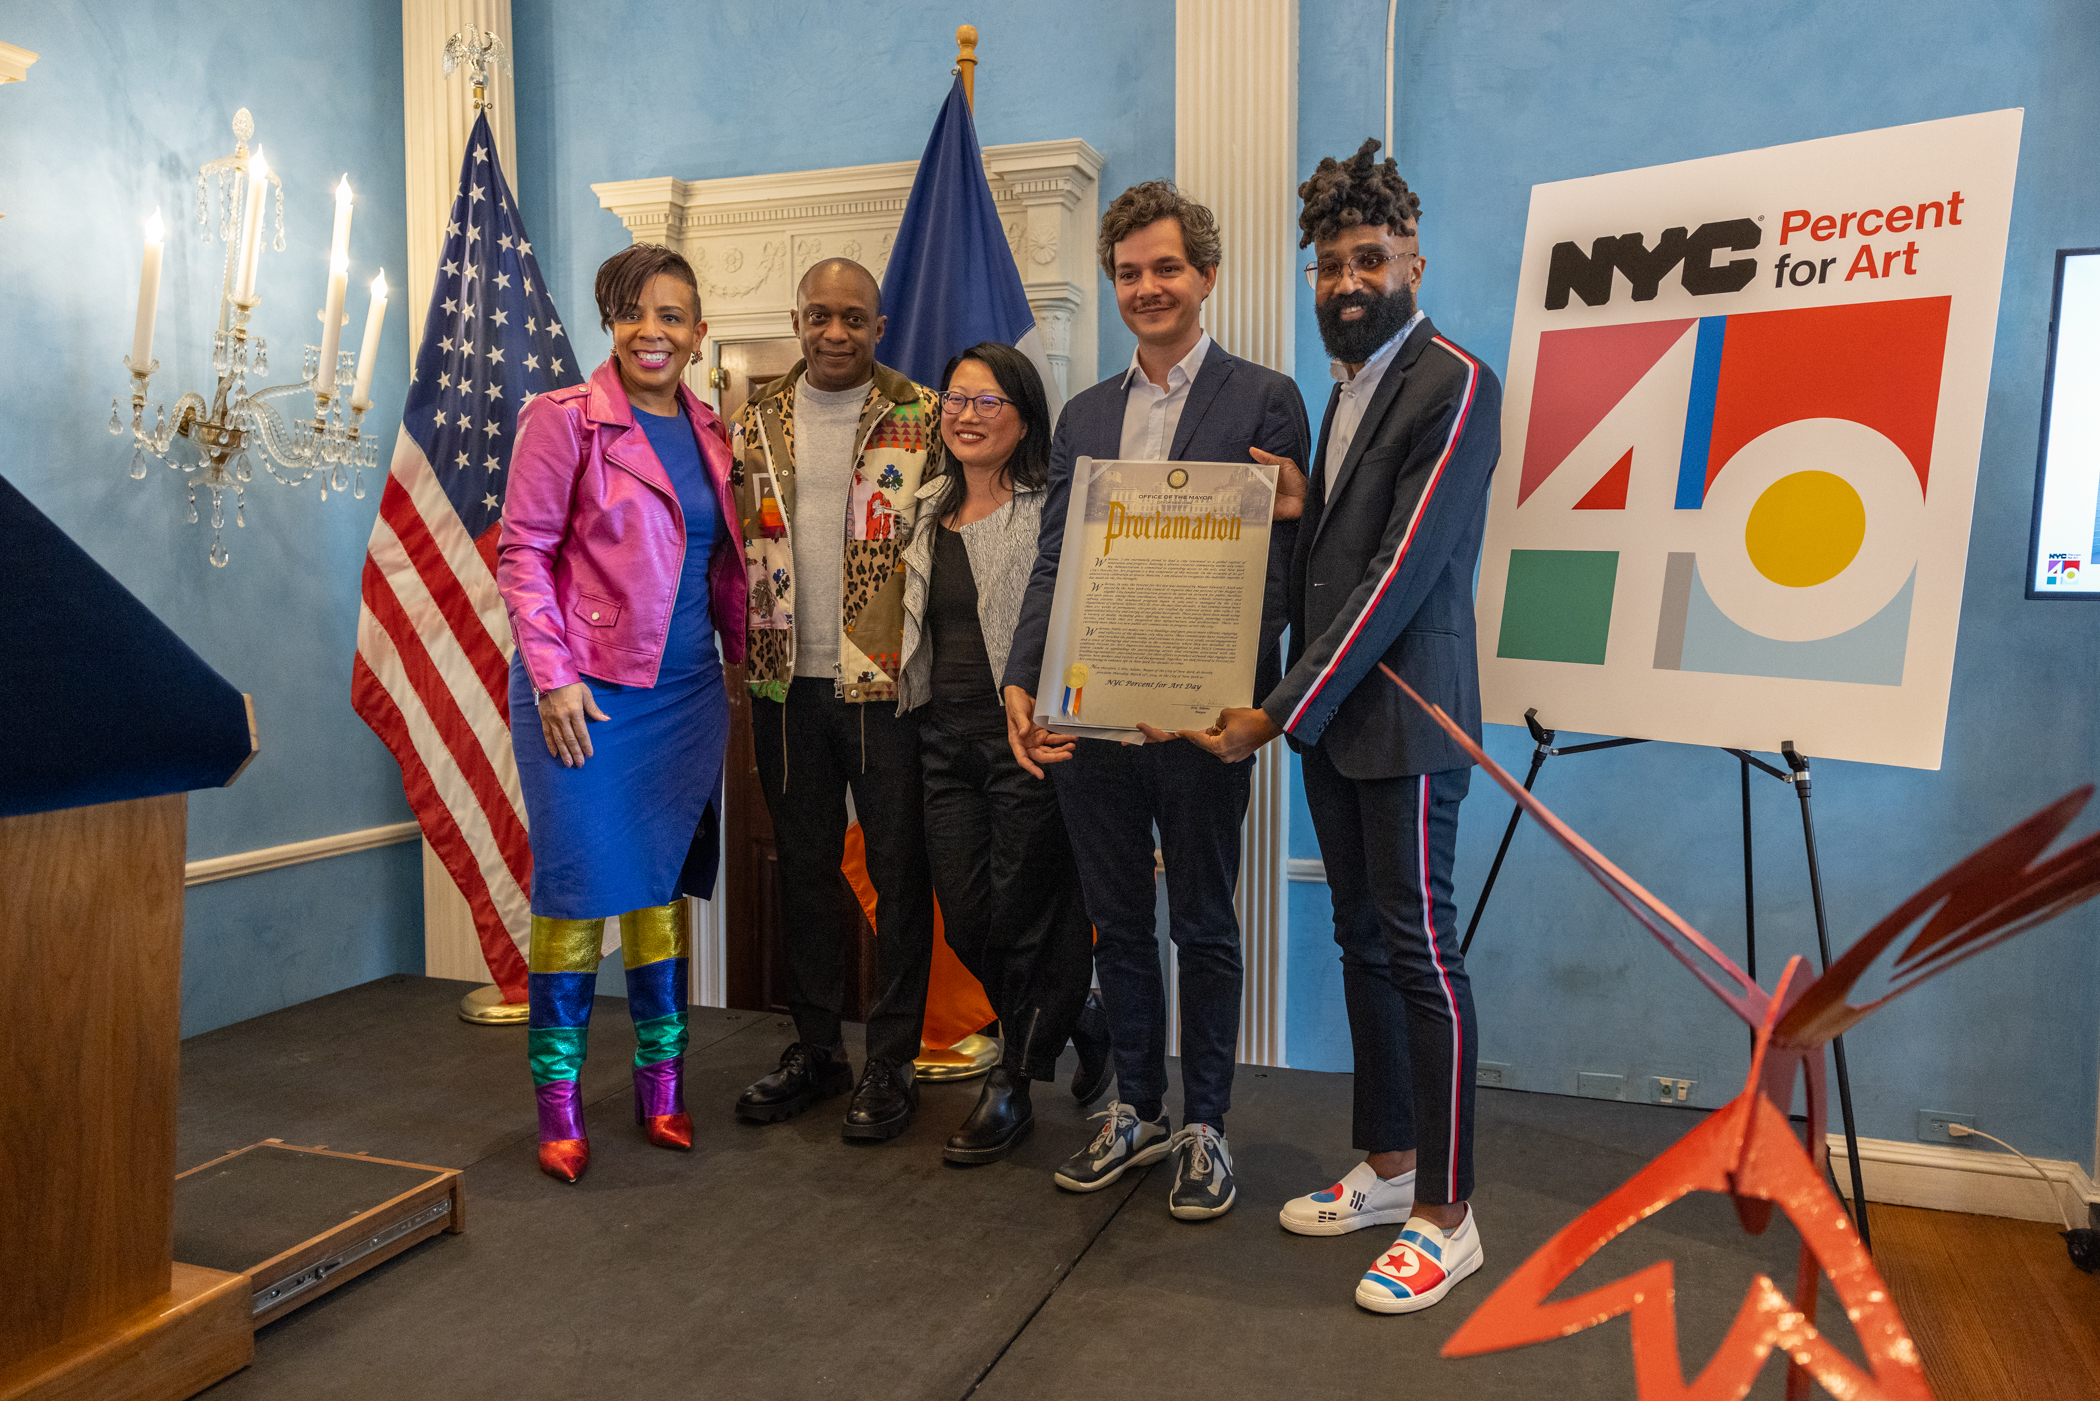 NYC Cultural Affairs gathers at Gracie Mansion with a proclamation for Percent for Art. 